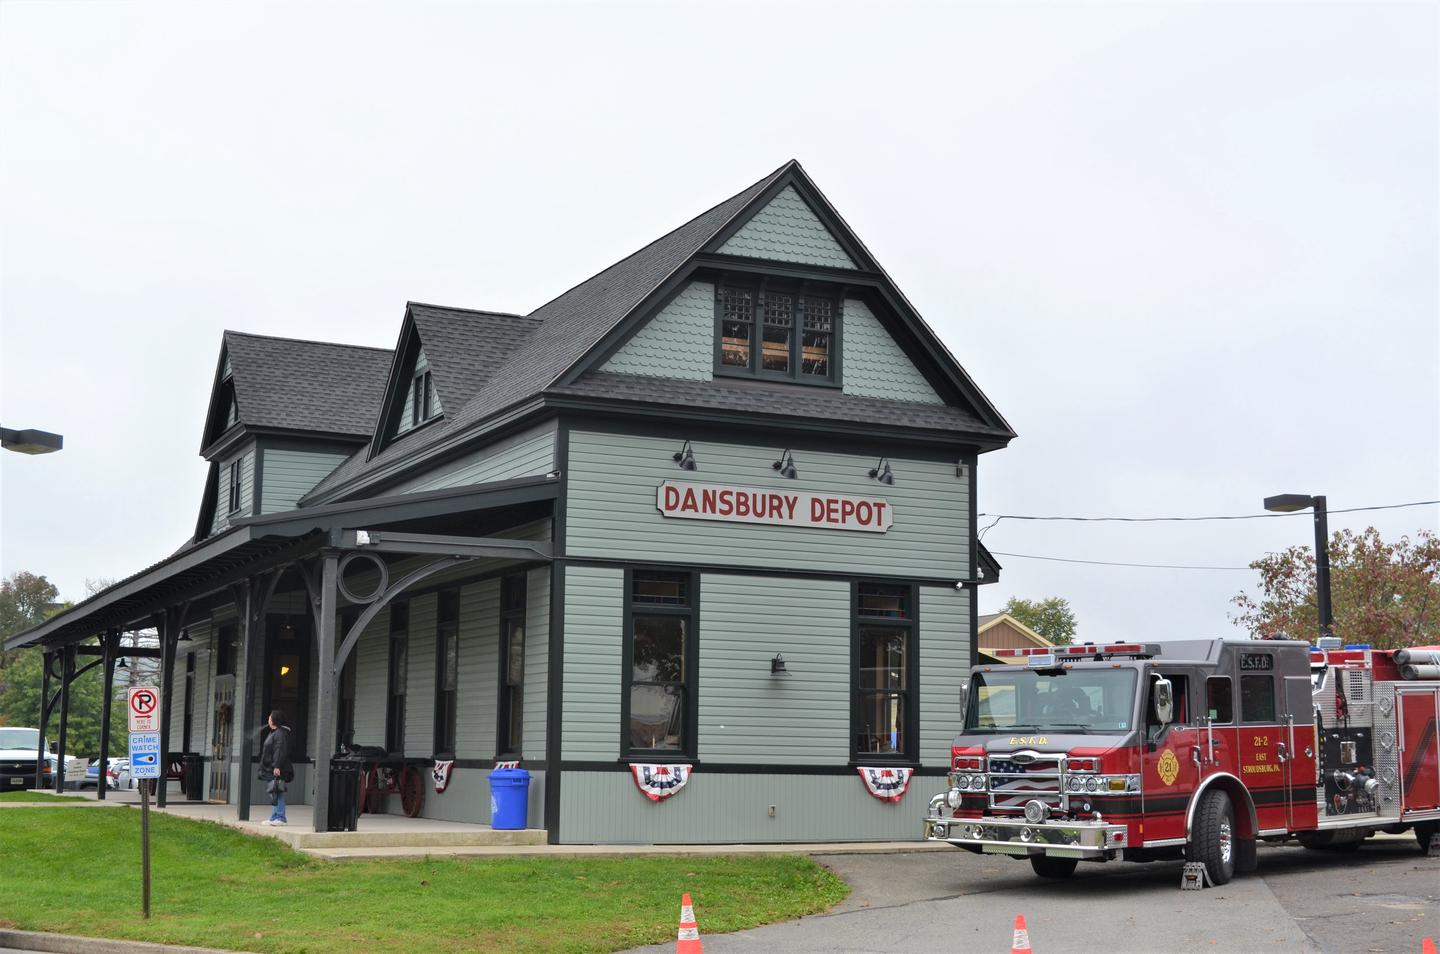 A firetruck is parked along side a train station.Dating back to 1863, the Dansbury Depot at East Stroudsburg is one of the oldest train stations to remain on the Delaware, Lackawanna and Western Railroad.